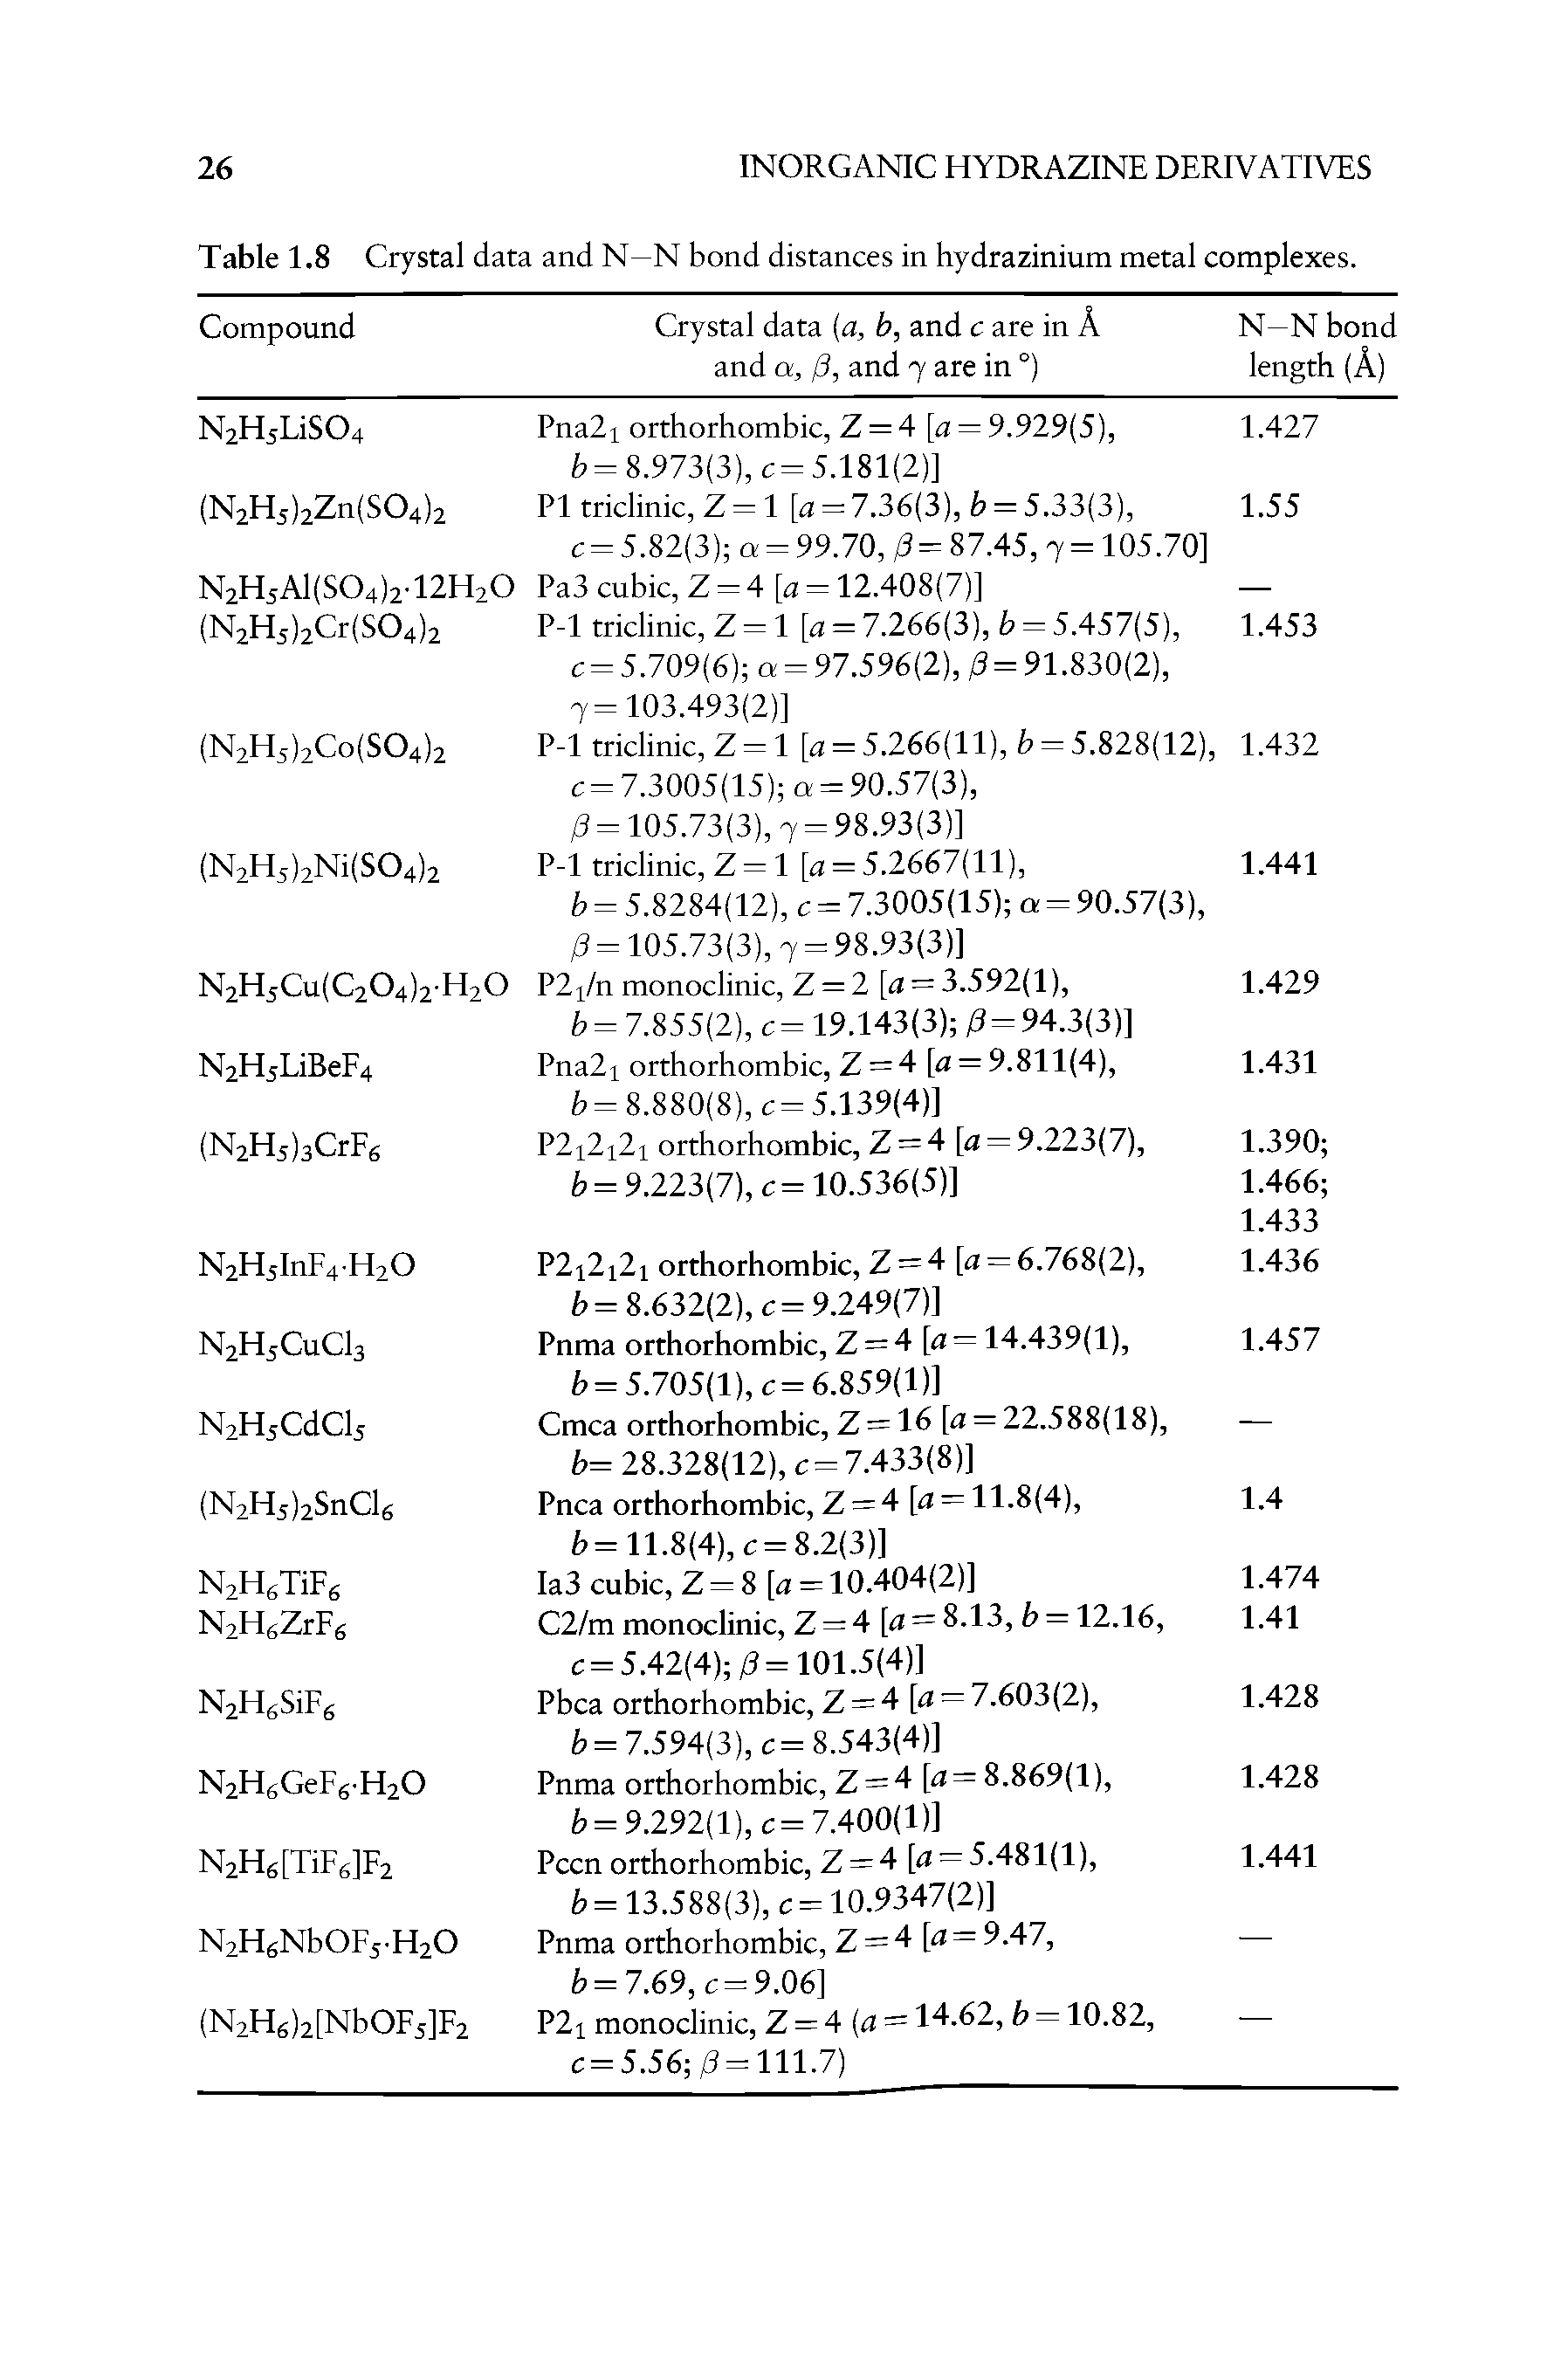 Table 1.8 Crystal data and N—N bond distances in hydrazinium metal complexes.